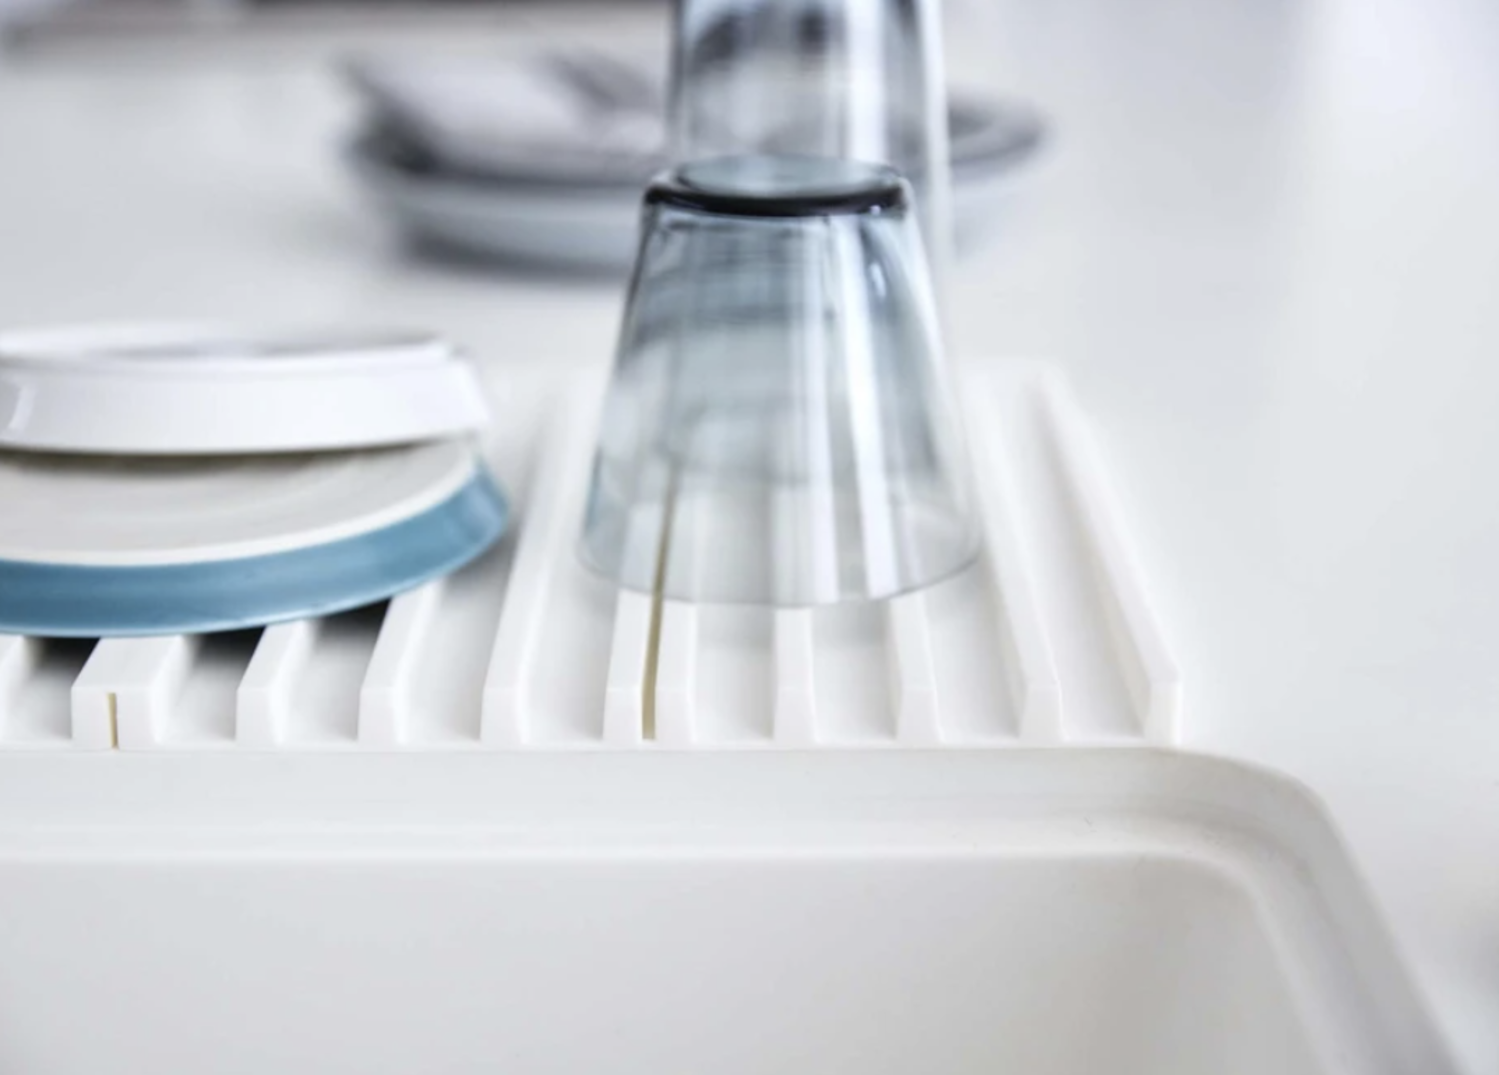 Dish Drying Rack with Silicone Mat